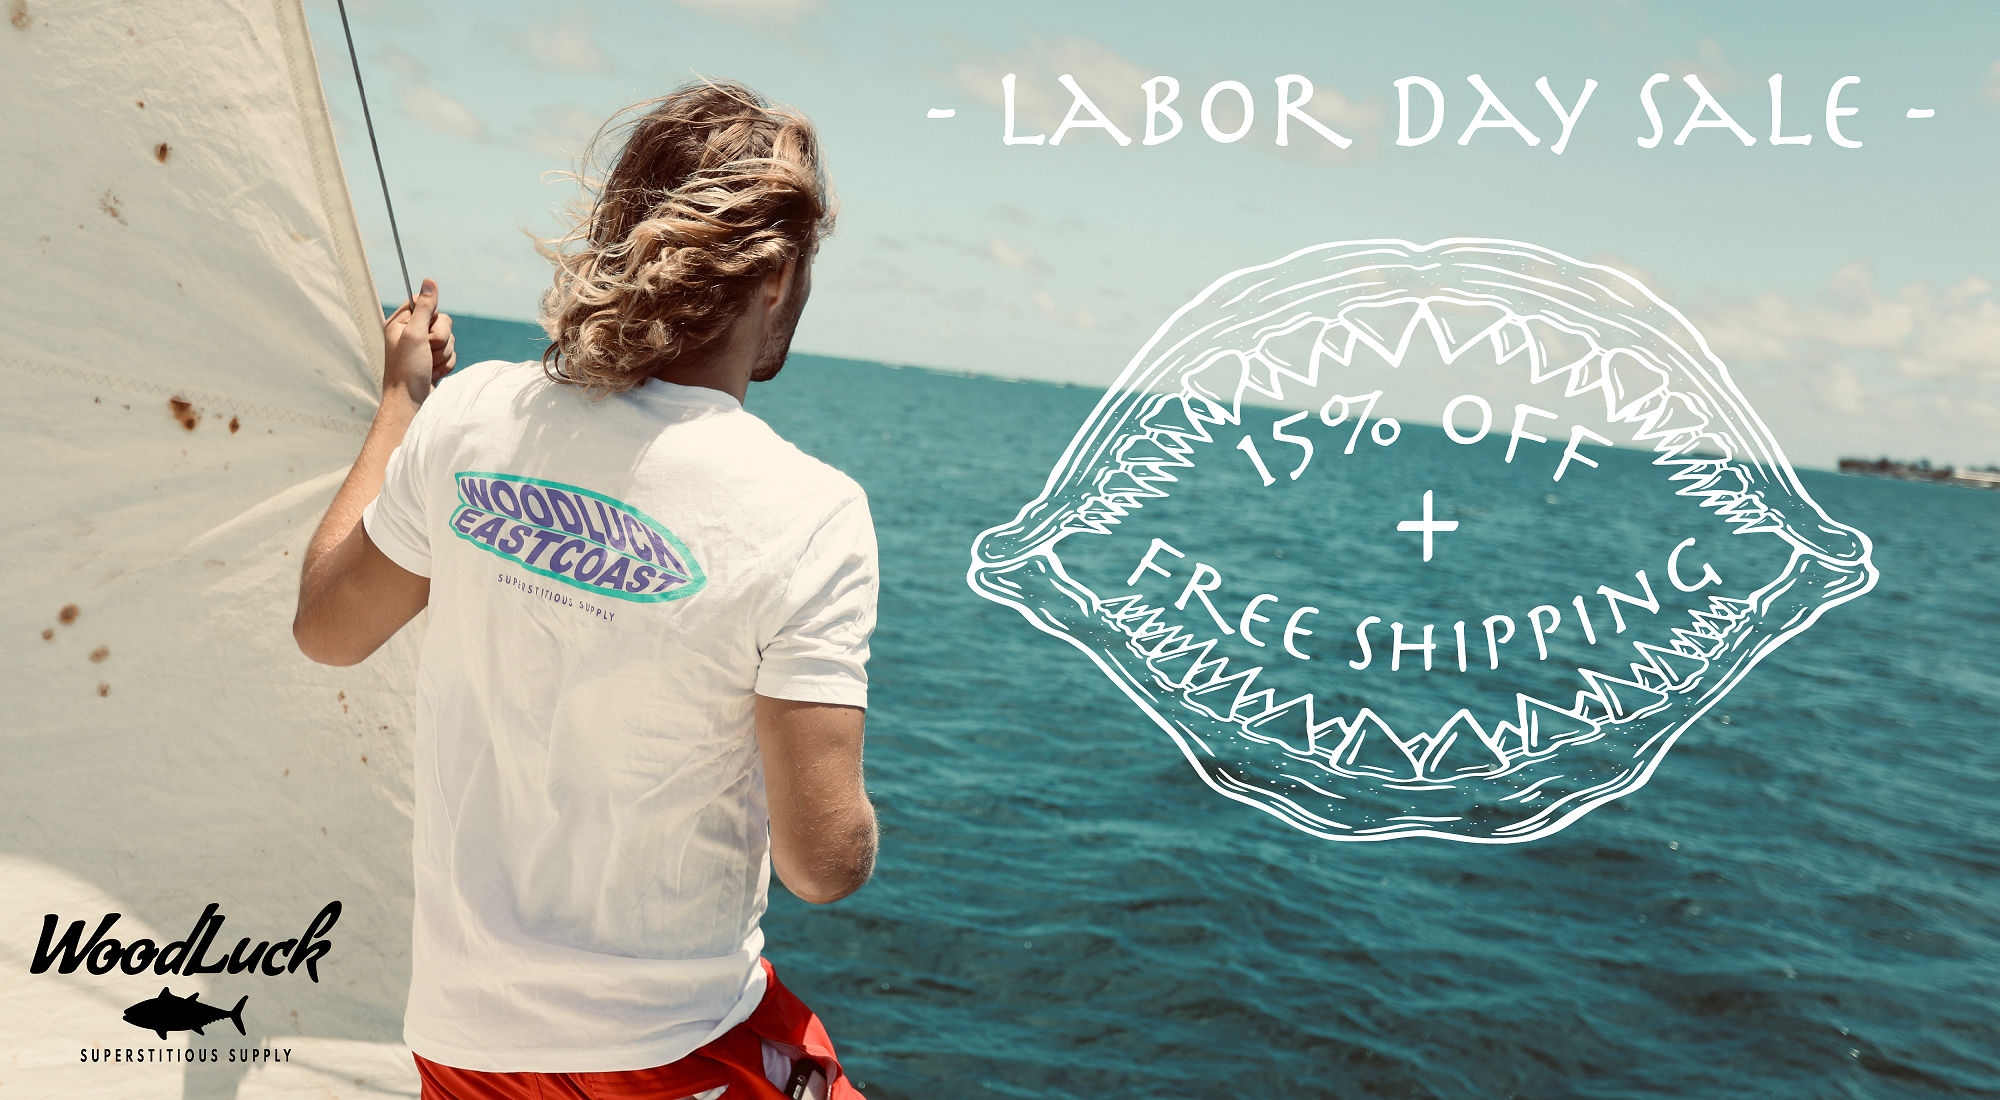 WoodLuck Clothing Line Offers Labor Day Sale